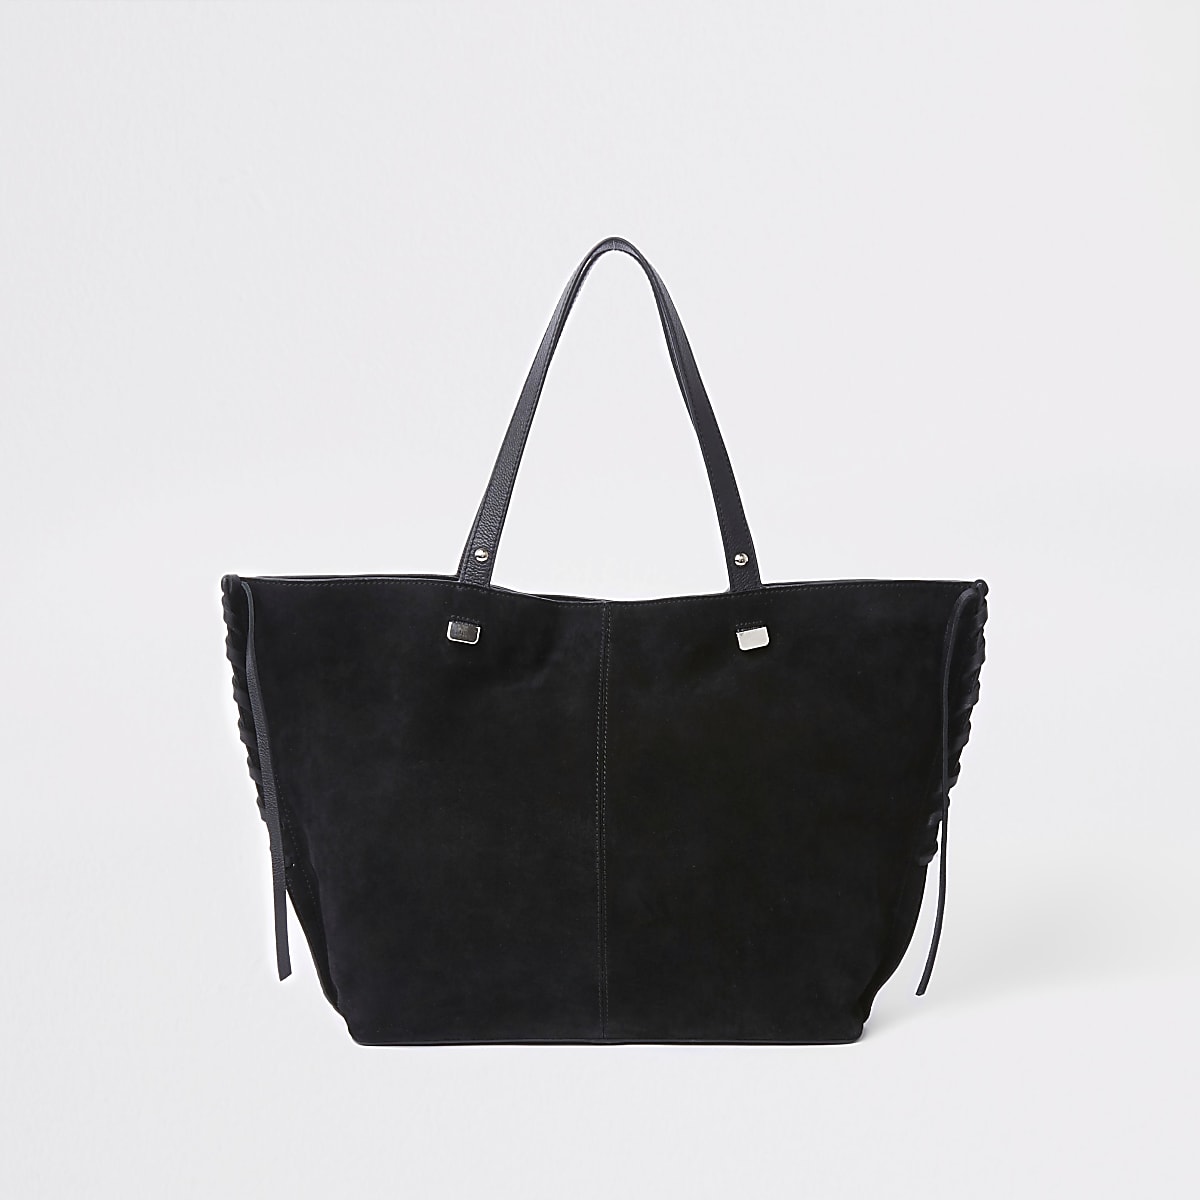 Black suede leather tote bag - Shopper & Tote Bags - Bags & Purses - women